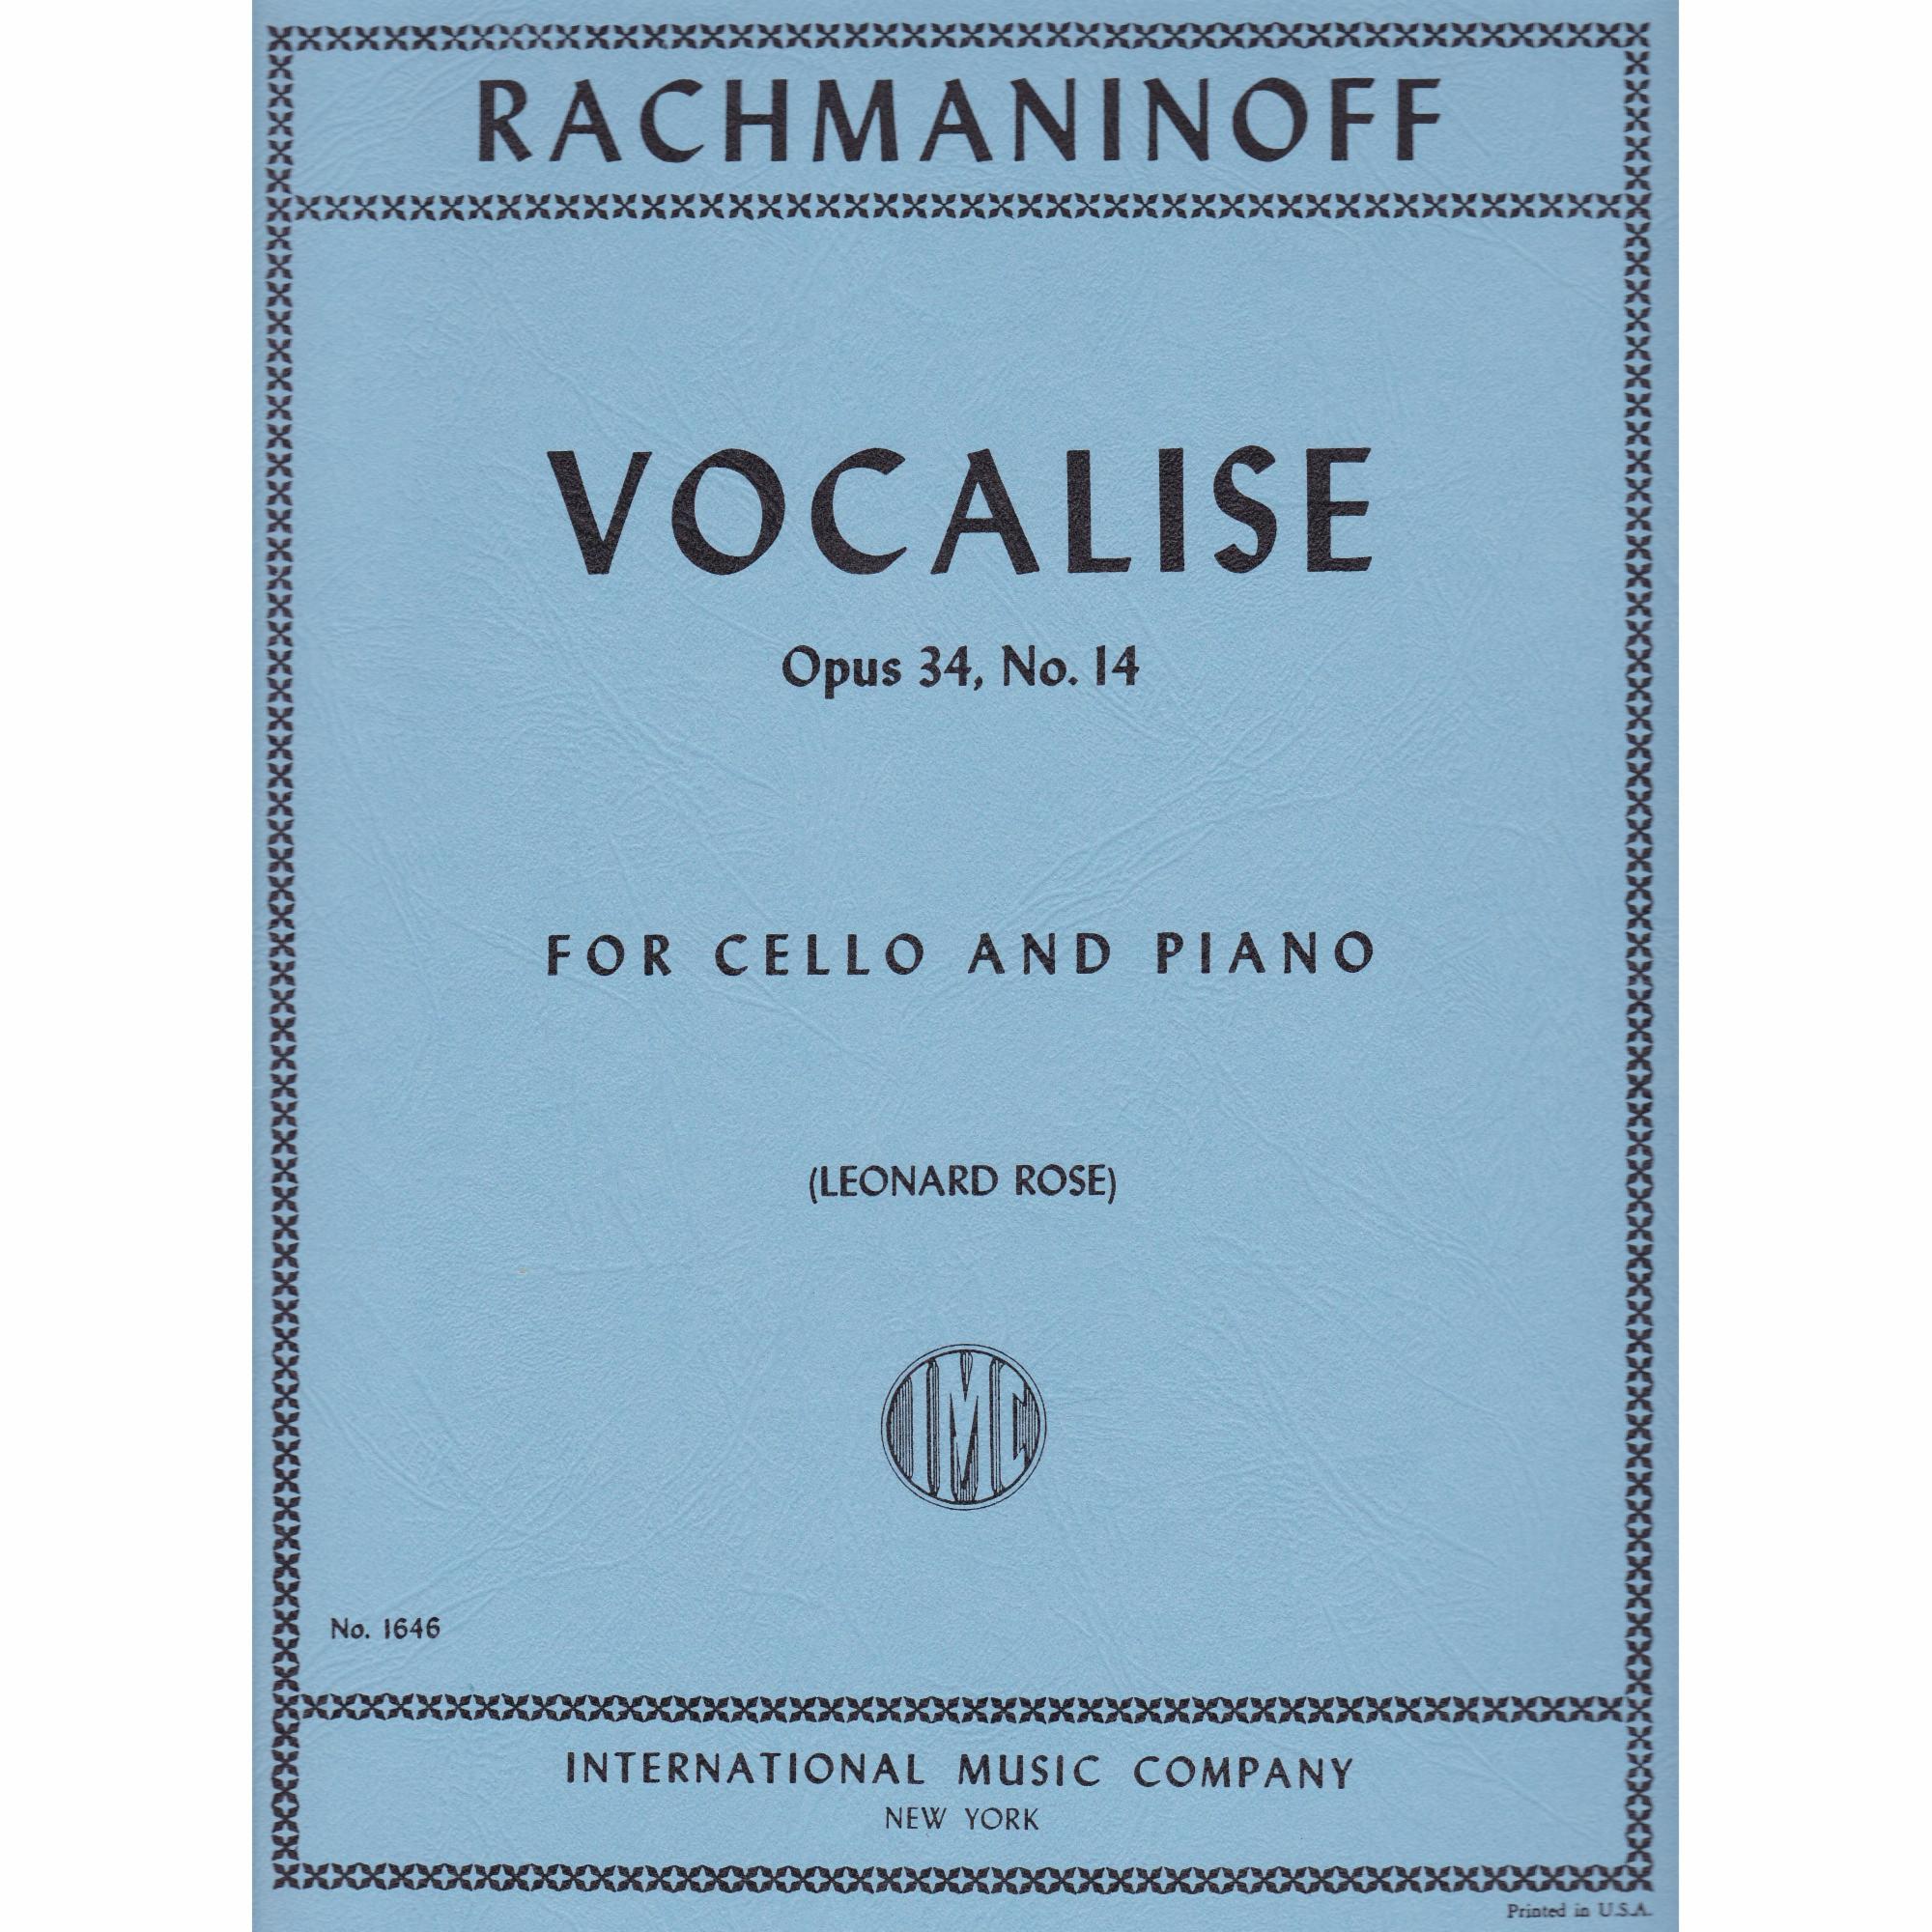 Vocalise, Op.34, No.14 for Cello and Piano